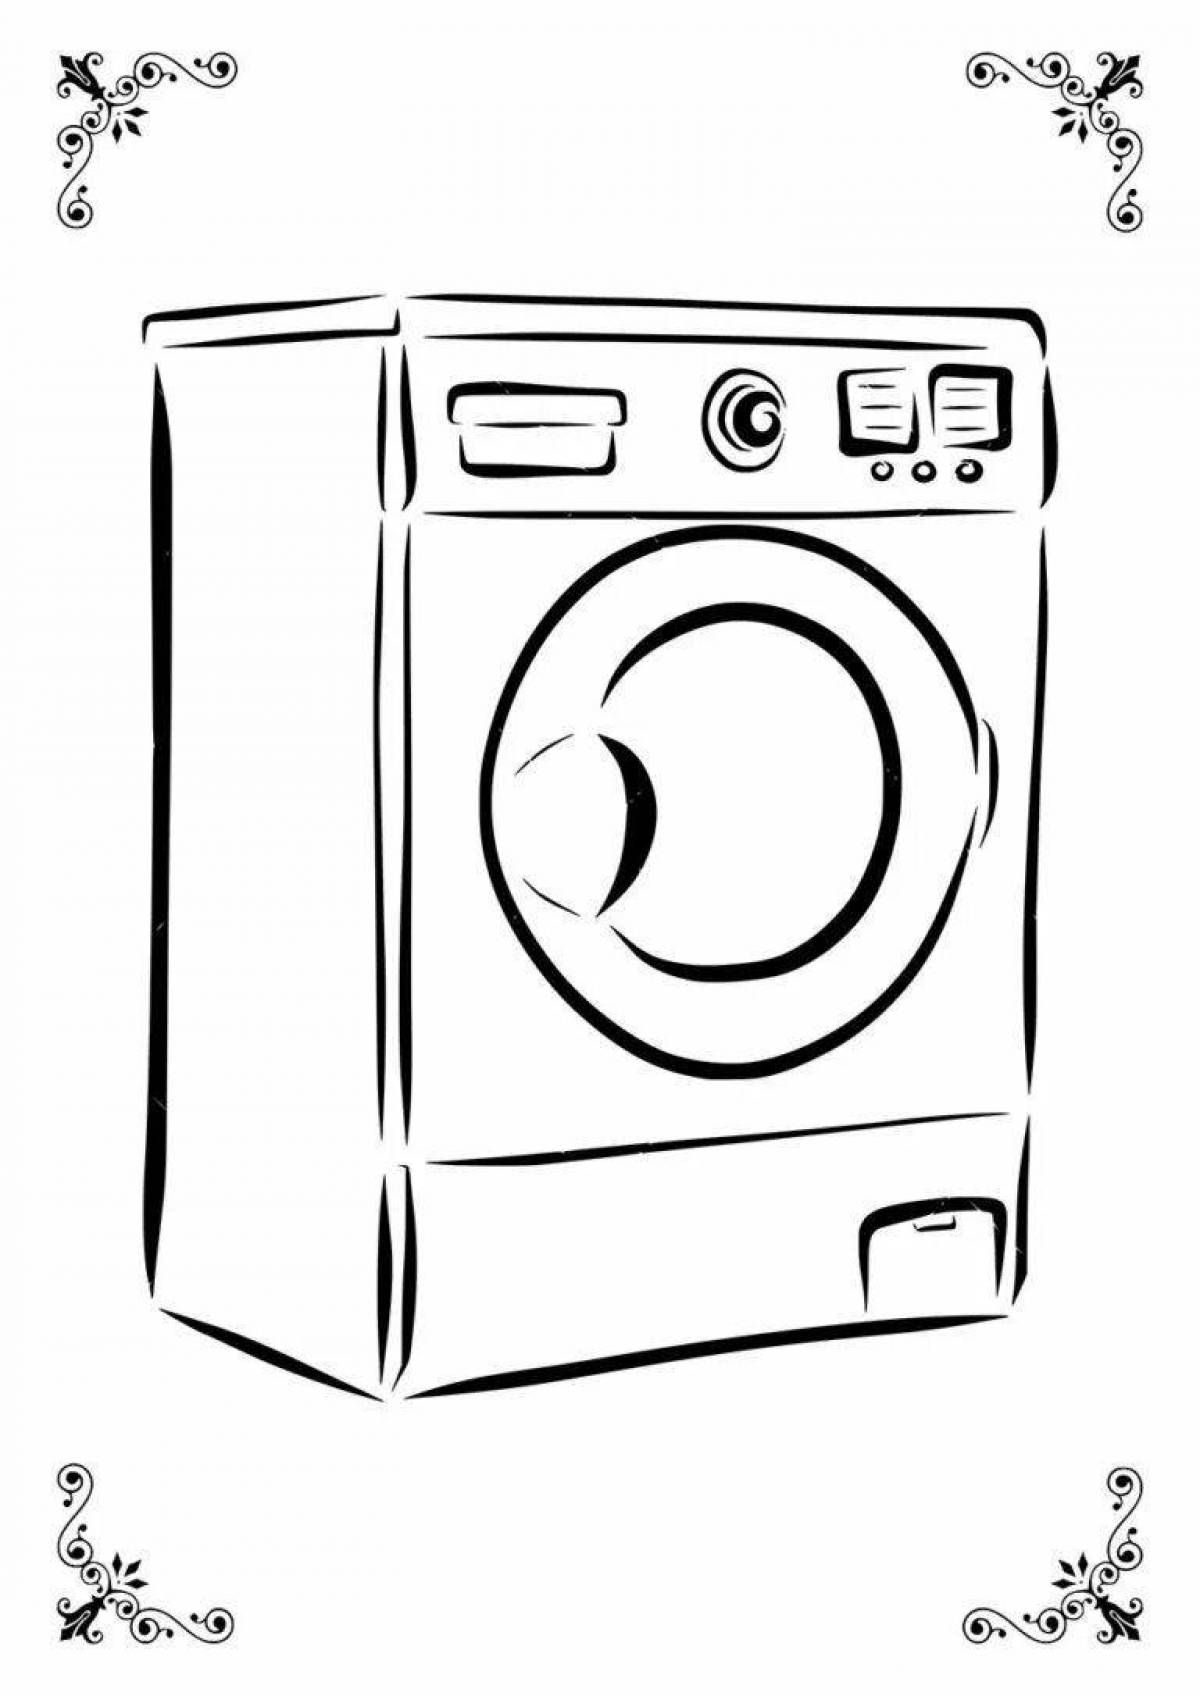 Awesome washing machine coloring page